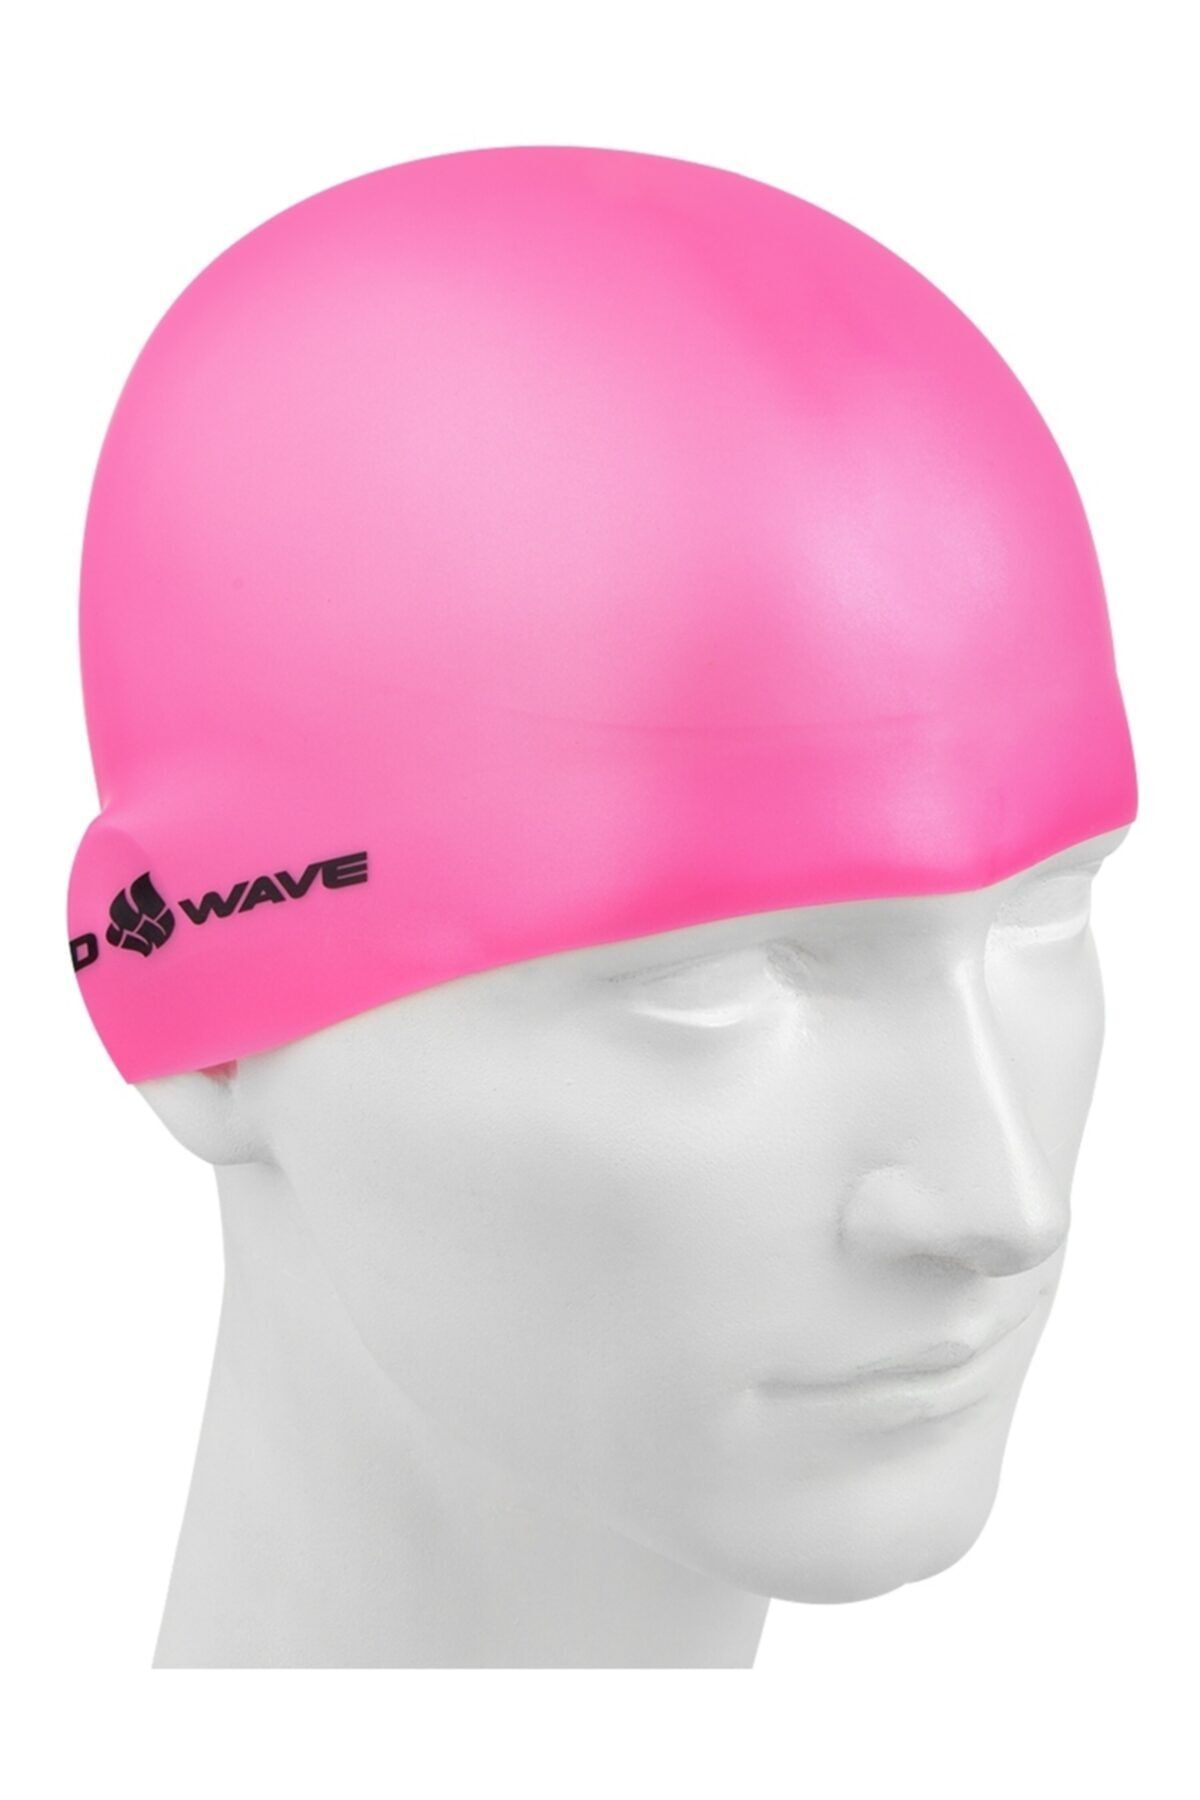 Mad Wave M0535 03 0 11w Silicone Cap Lıght, , Pink